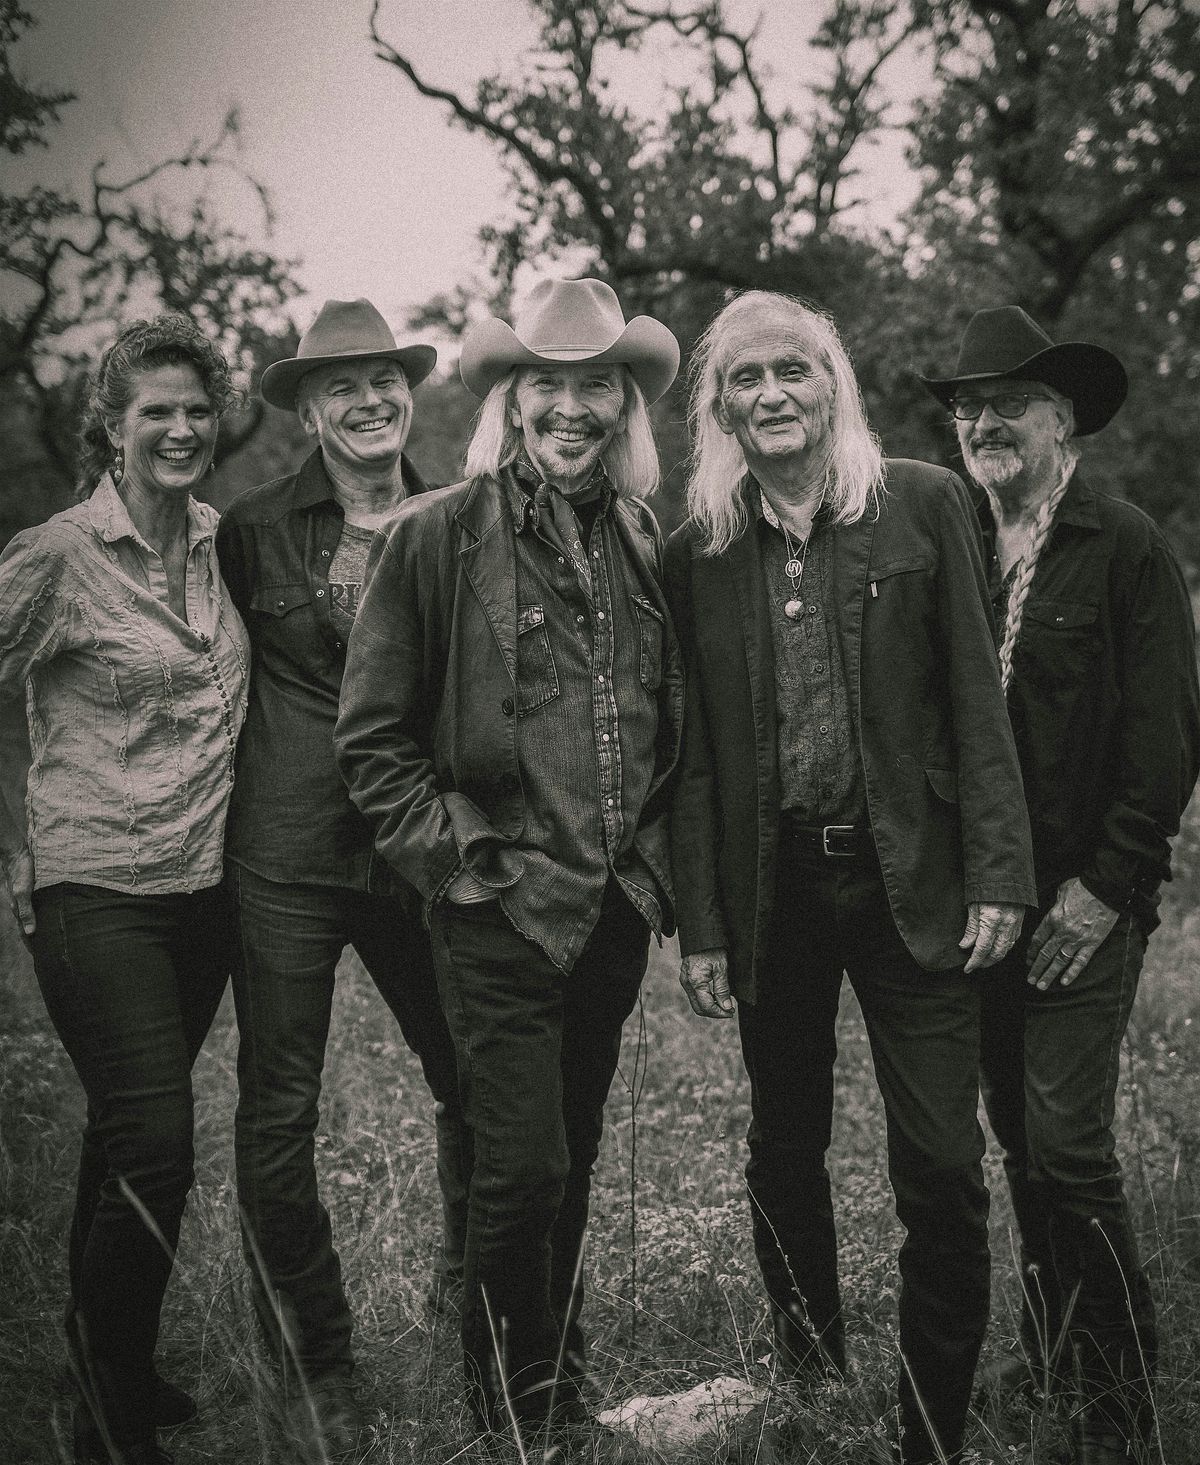 Dave Alvin &  Jimmie Dale Gilmore with the Guilty Ones at the Women's Club